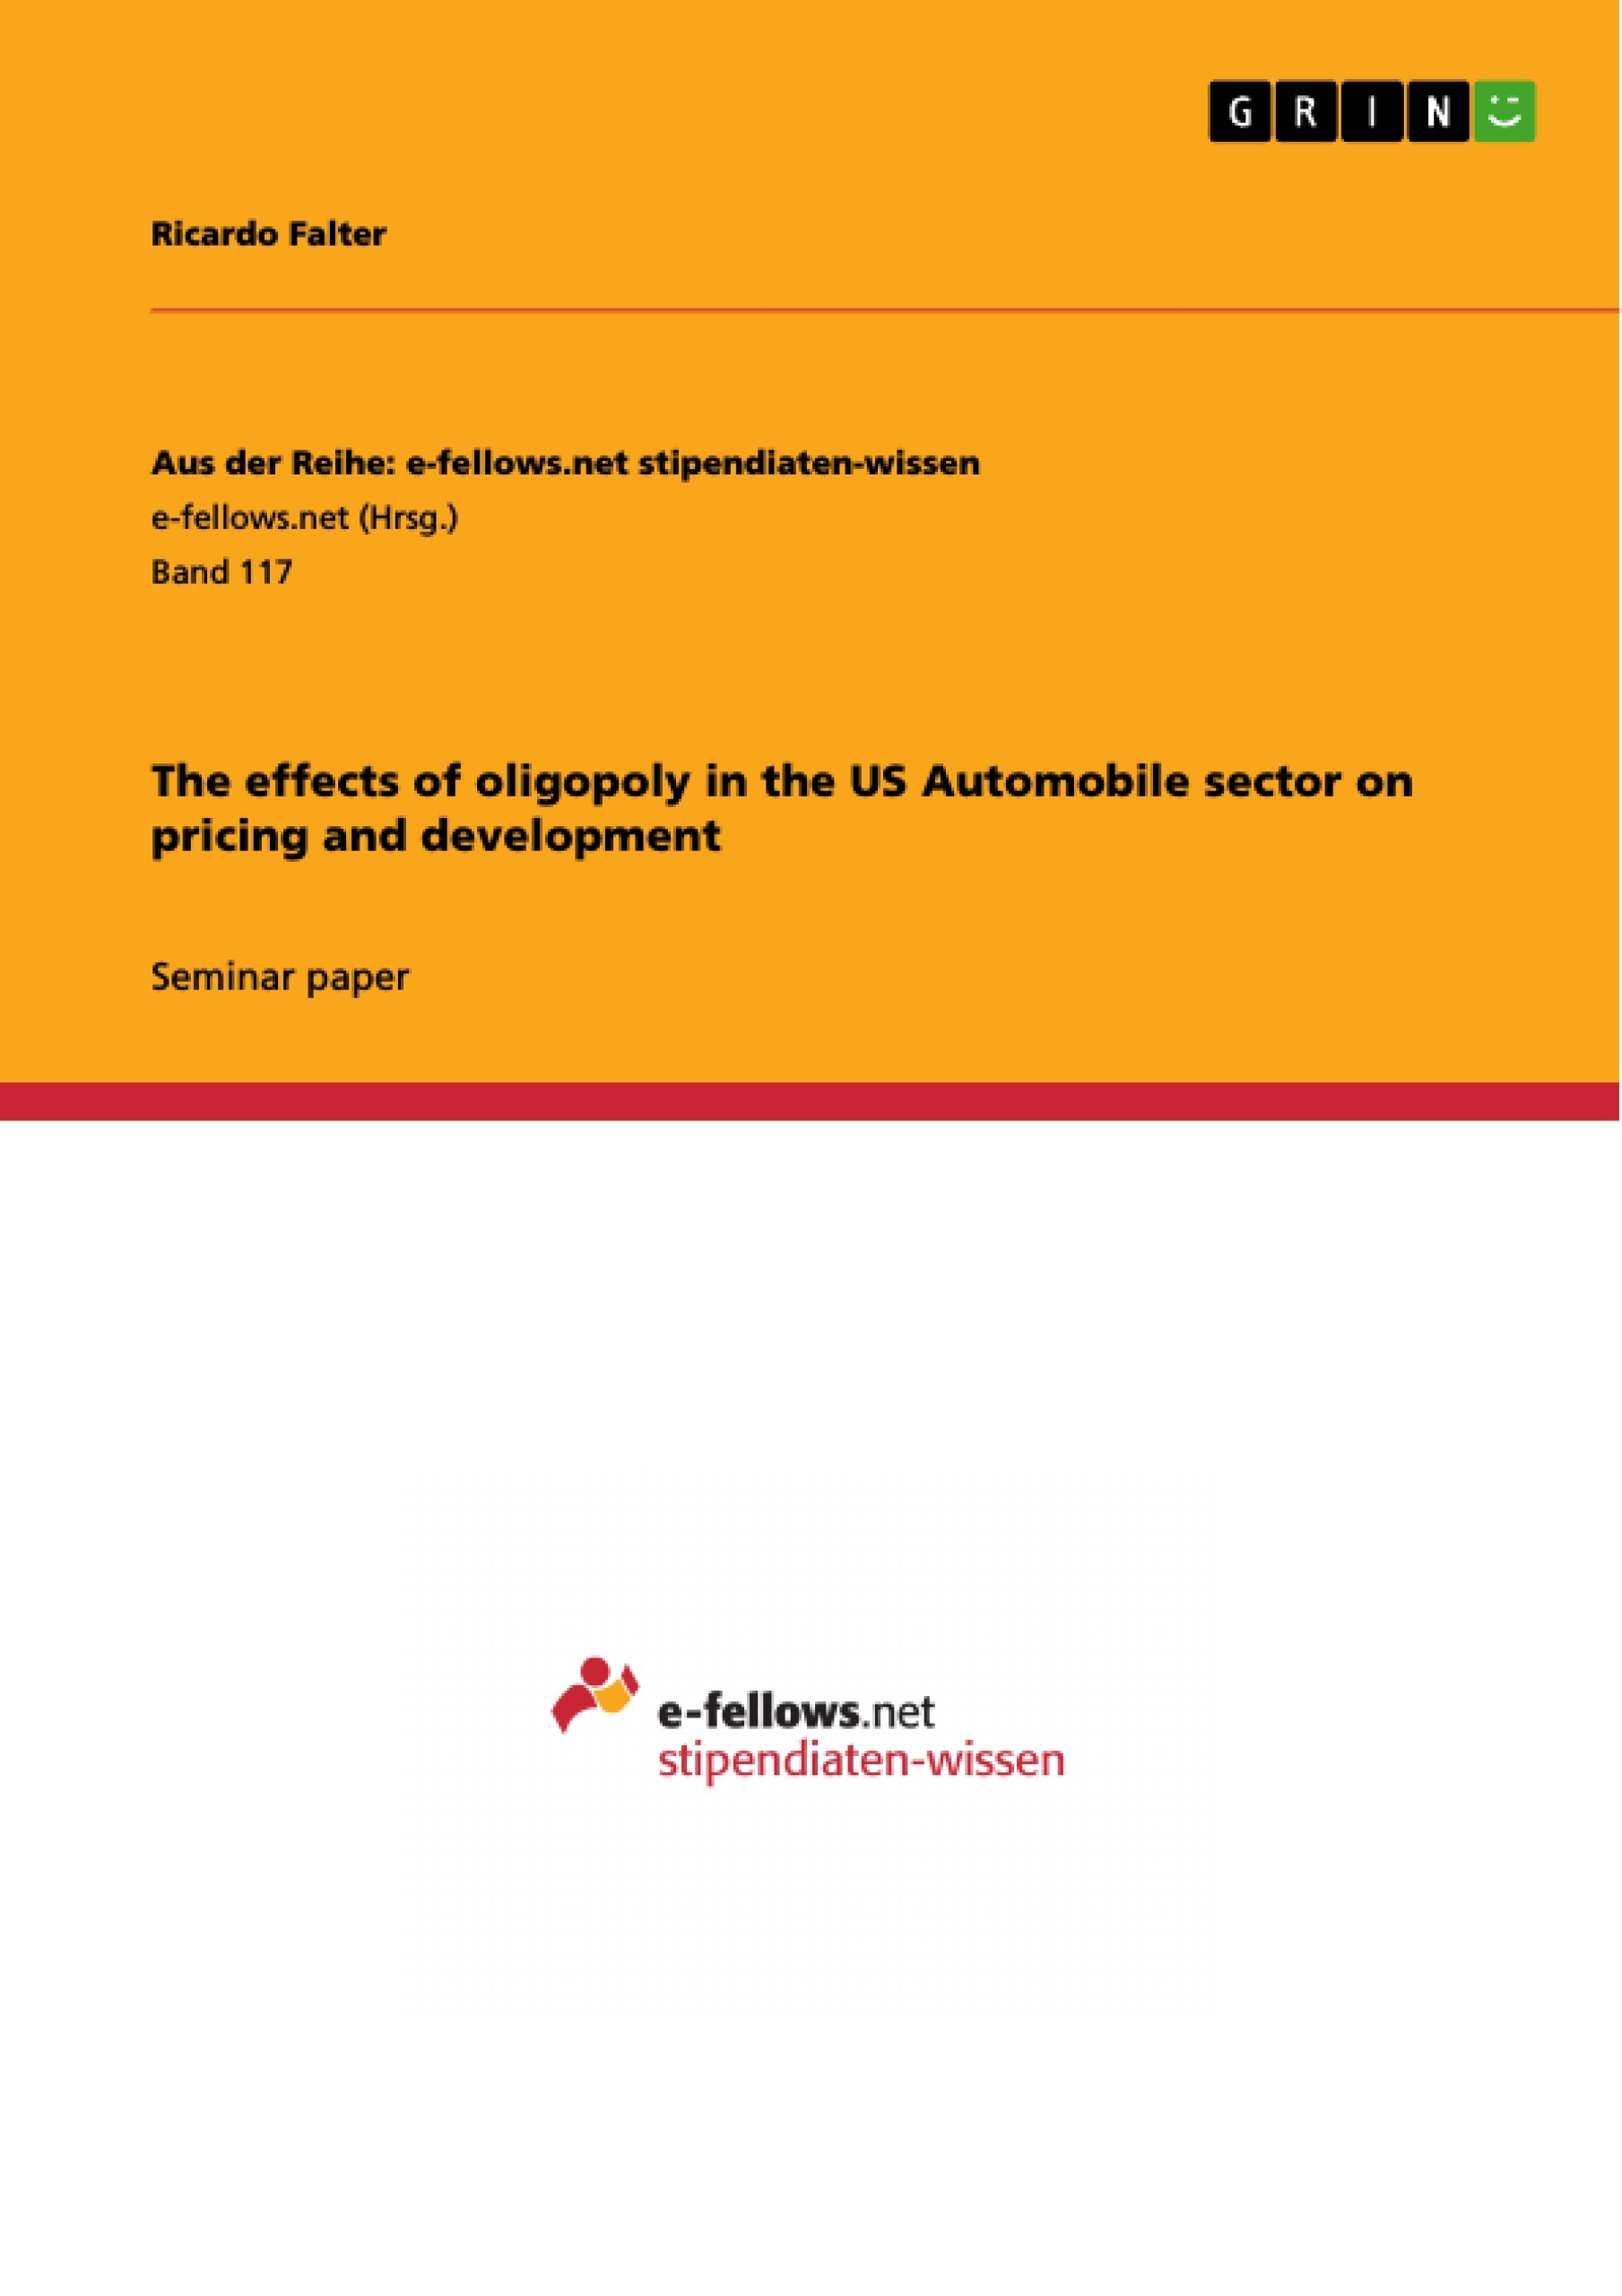 Title: The effects of oligopoly in the US Automobile sector on pricing and development